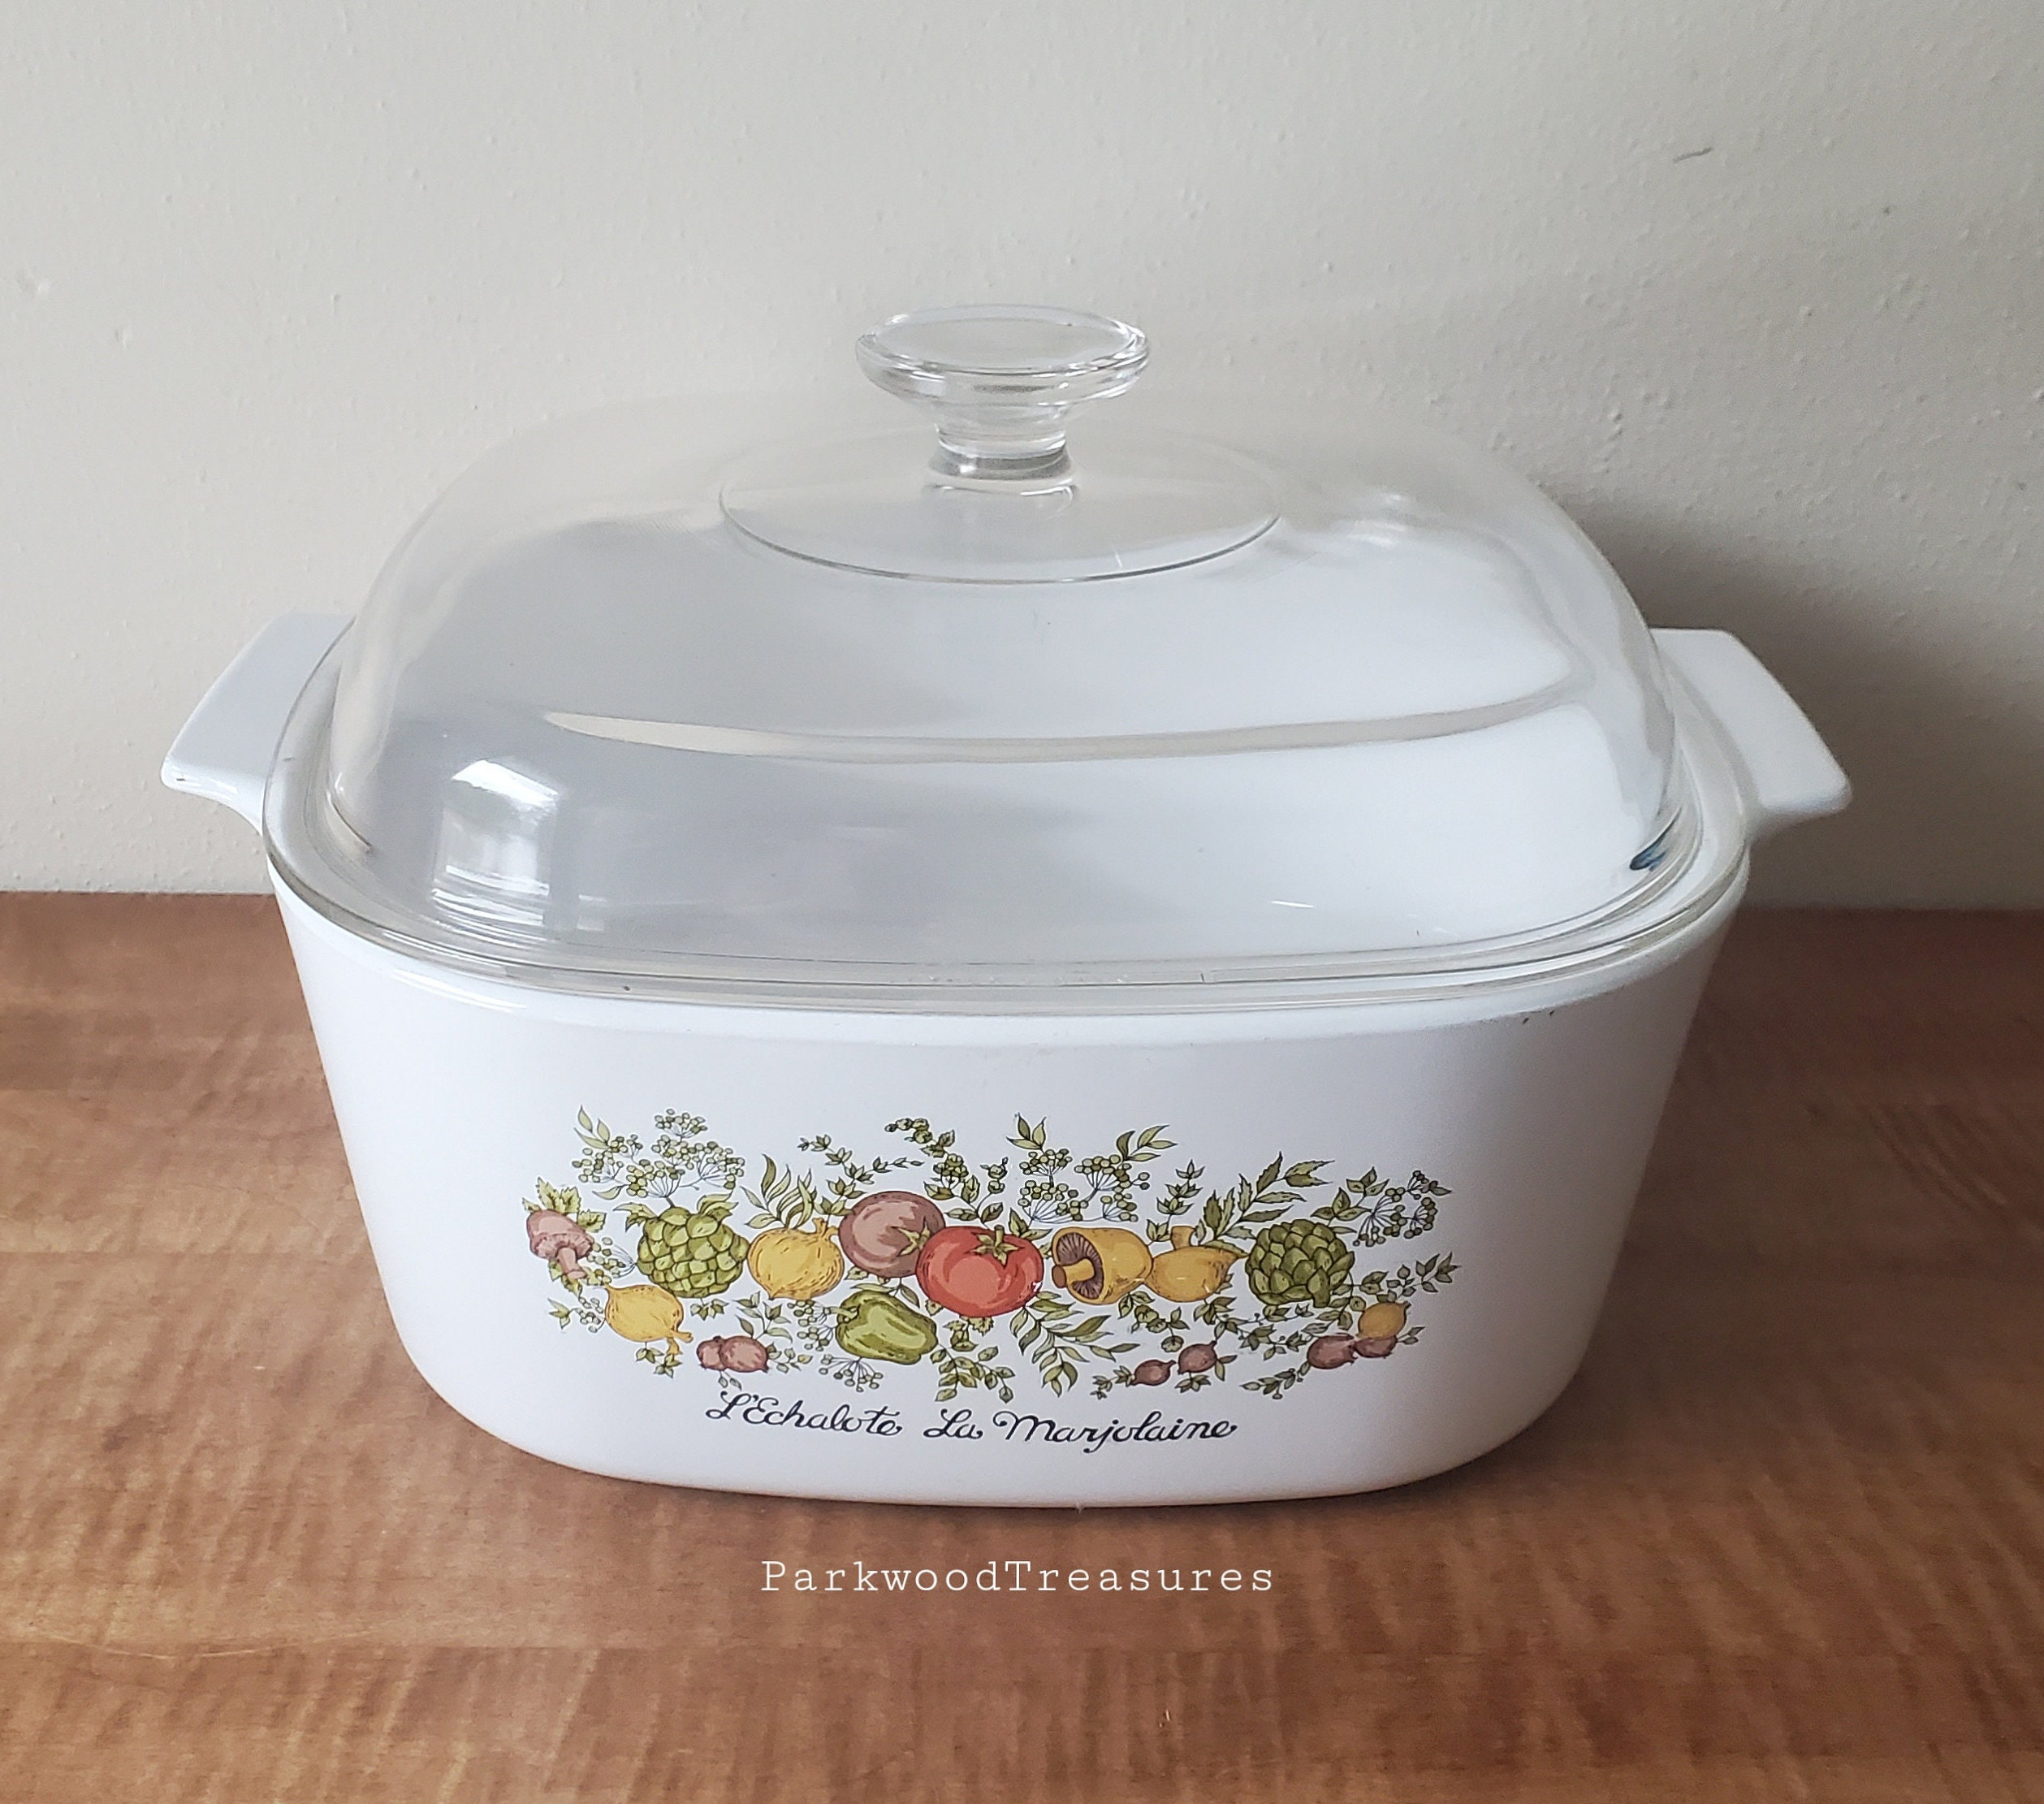 VINTAGE Corning Ware Spice of Life Casserole Dish Pyrex Lid Electric Skillet